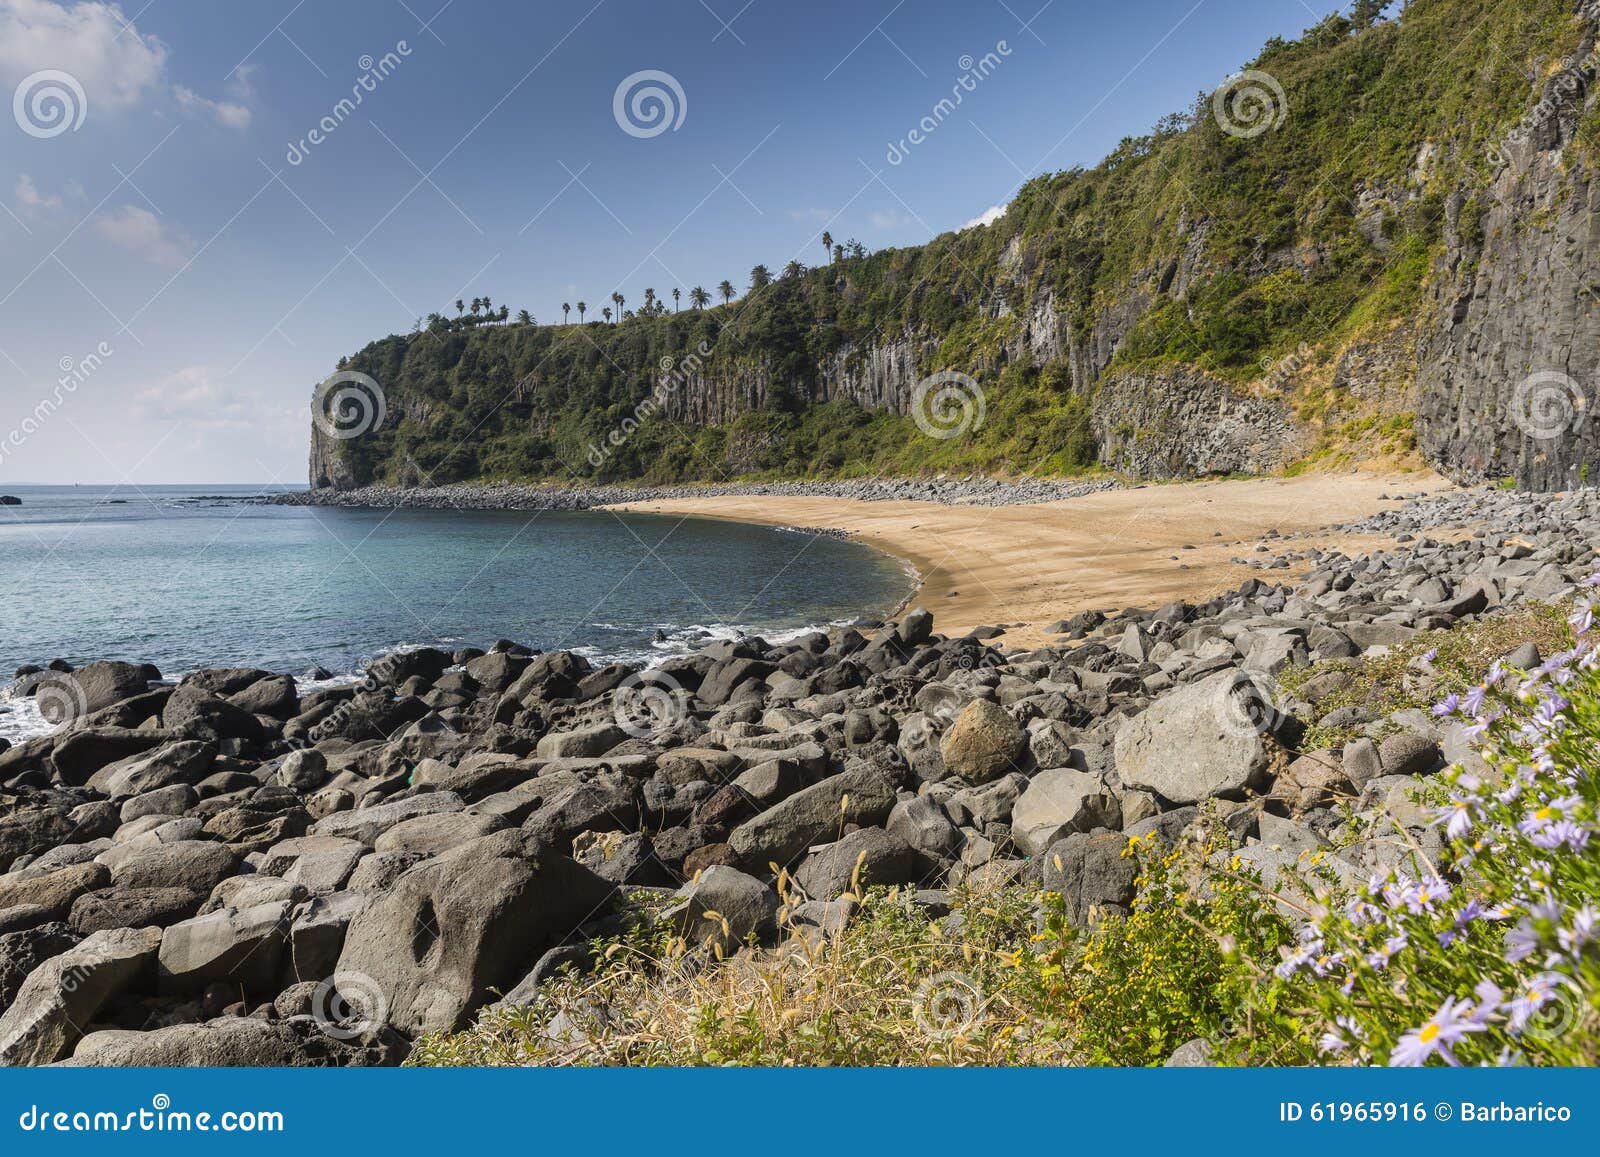 secluded and desolated beach